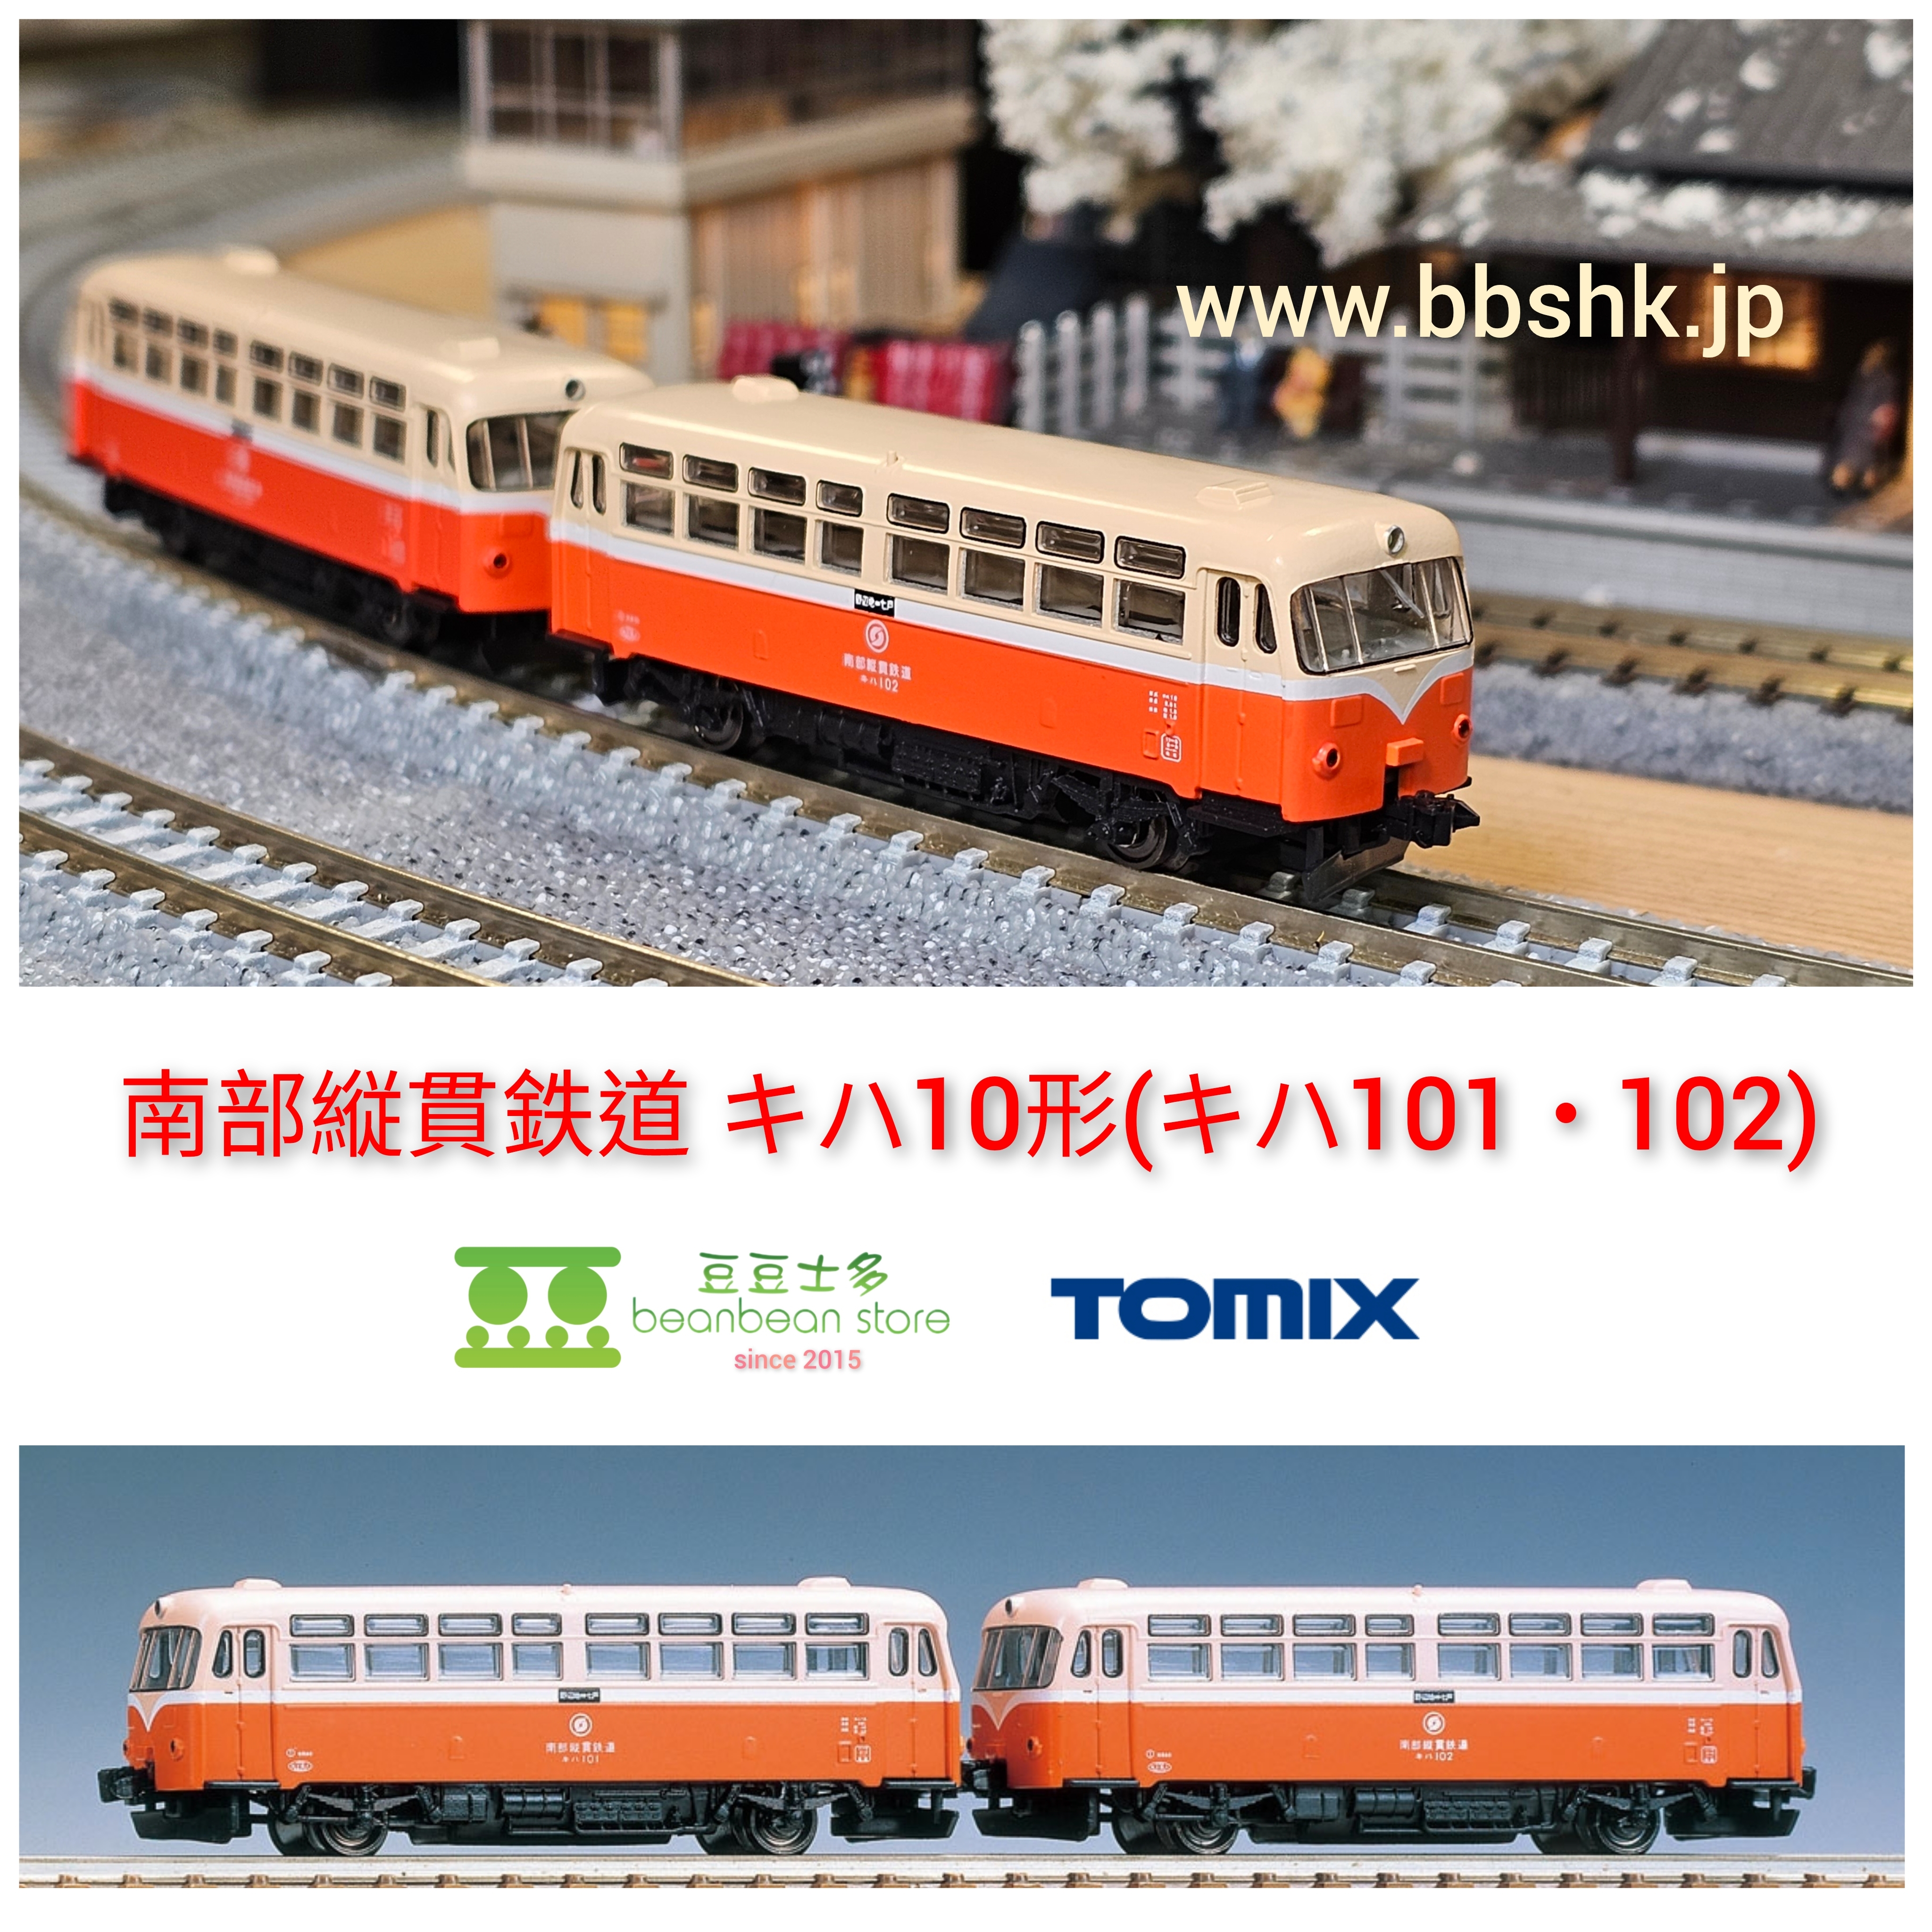 TOMIX 98120 南部縦貫鉄道 キハ10形 (キハ101・102) 2両